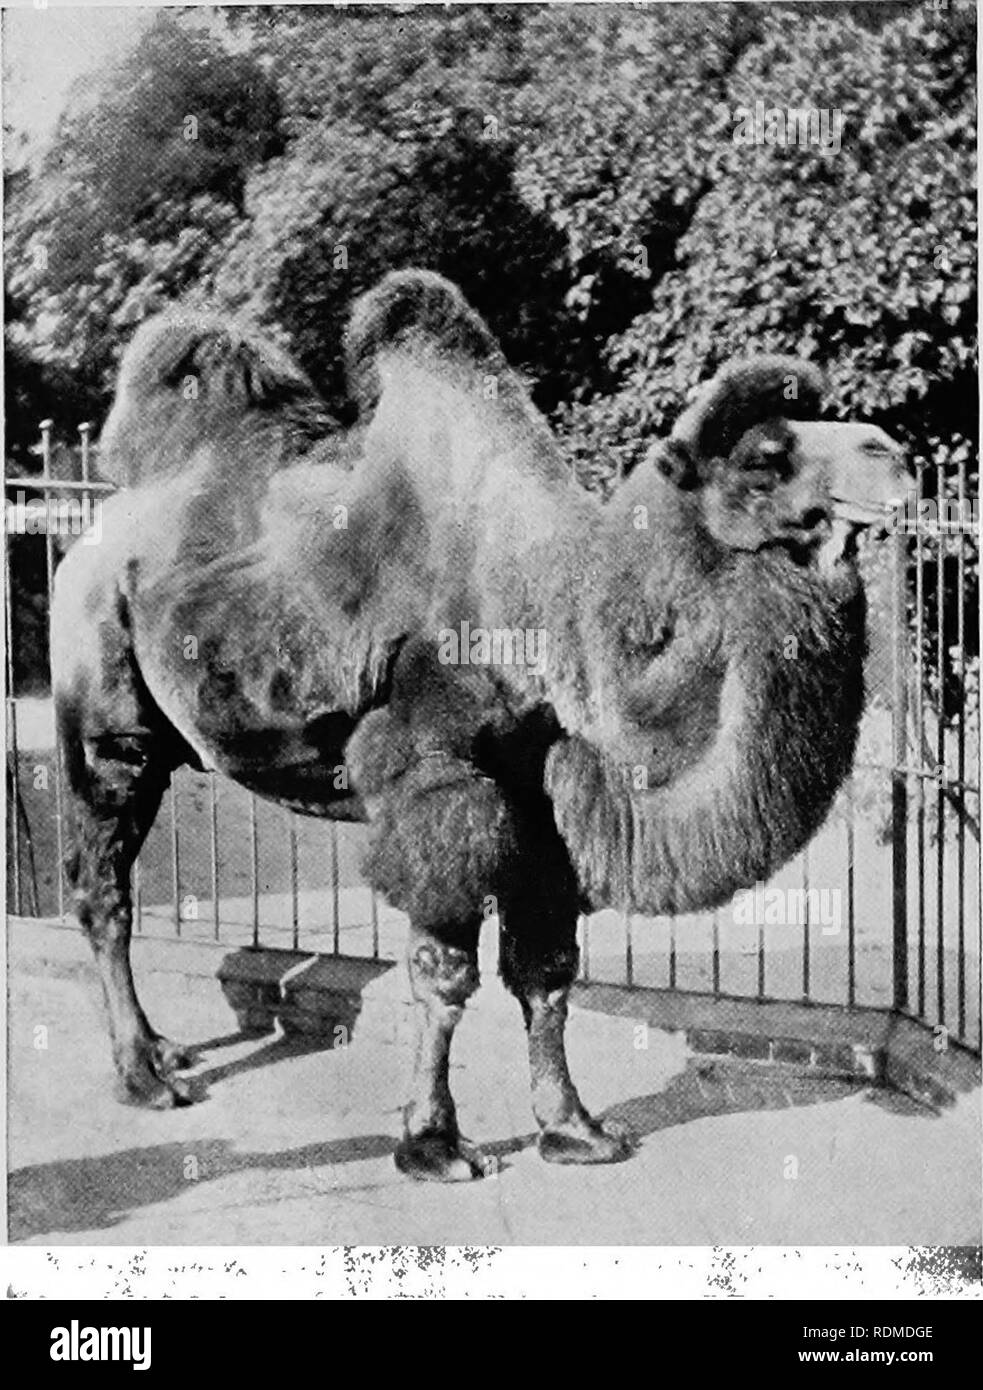 Mammals of other lands;. Mammals. 270 THE LIVING ANIMALS OF THE WORLD.  Photo by Charles Knight'} Ijildershot BACTRIAN CAMEL Tic most useful  transport animal of Central jisia THE LLAMAS The Llamas